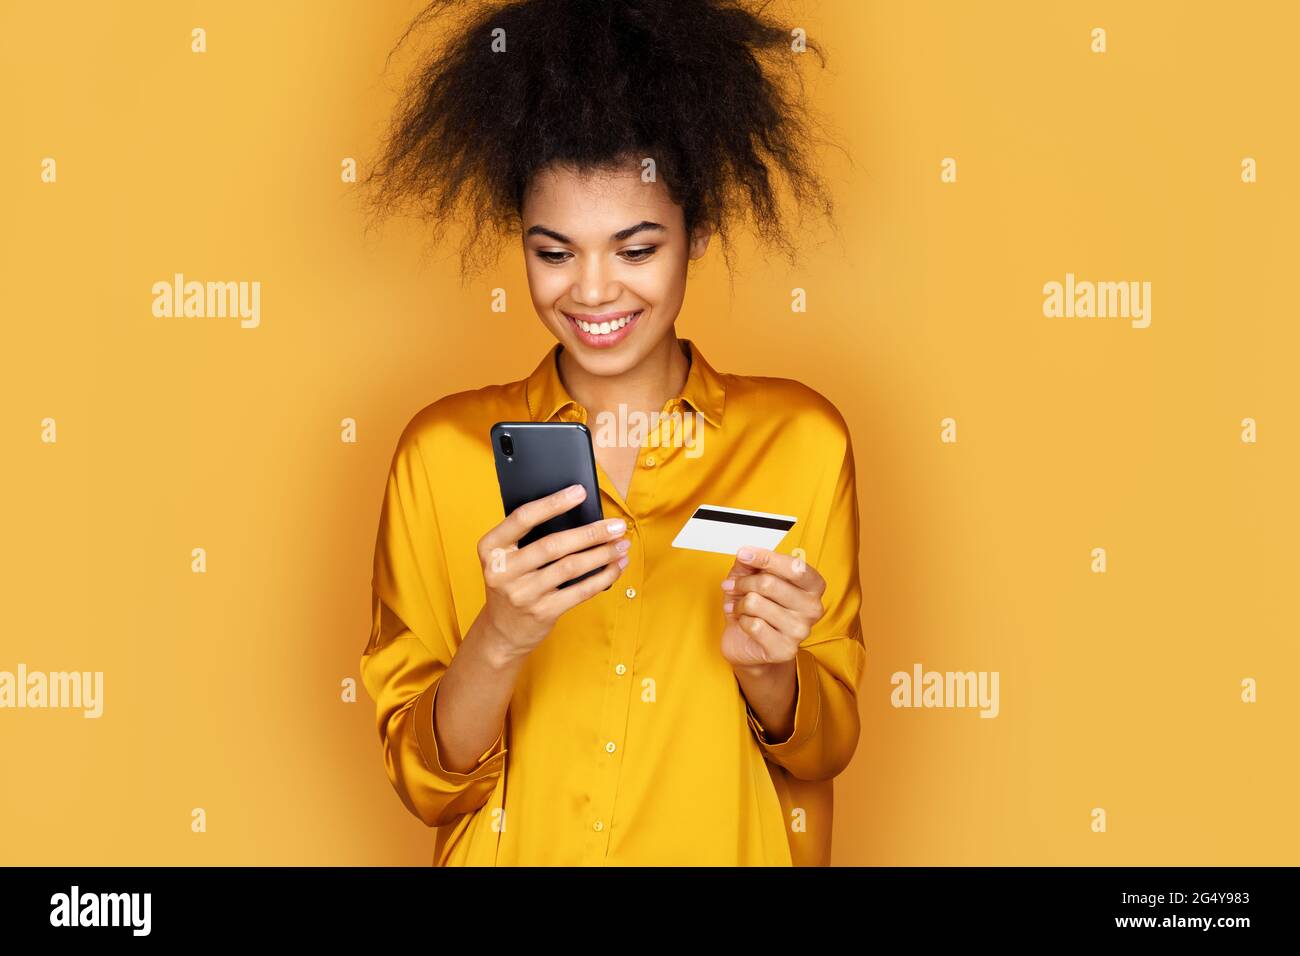 Young girl makes a payment, using a credit card and smartphone. Photo of african american girl on yellow background Stock Photo